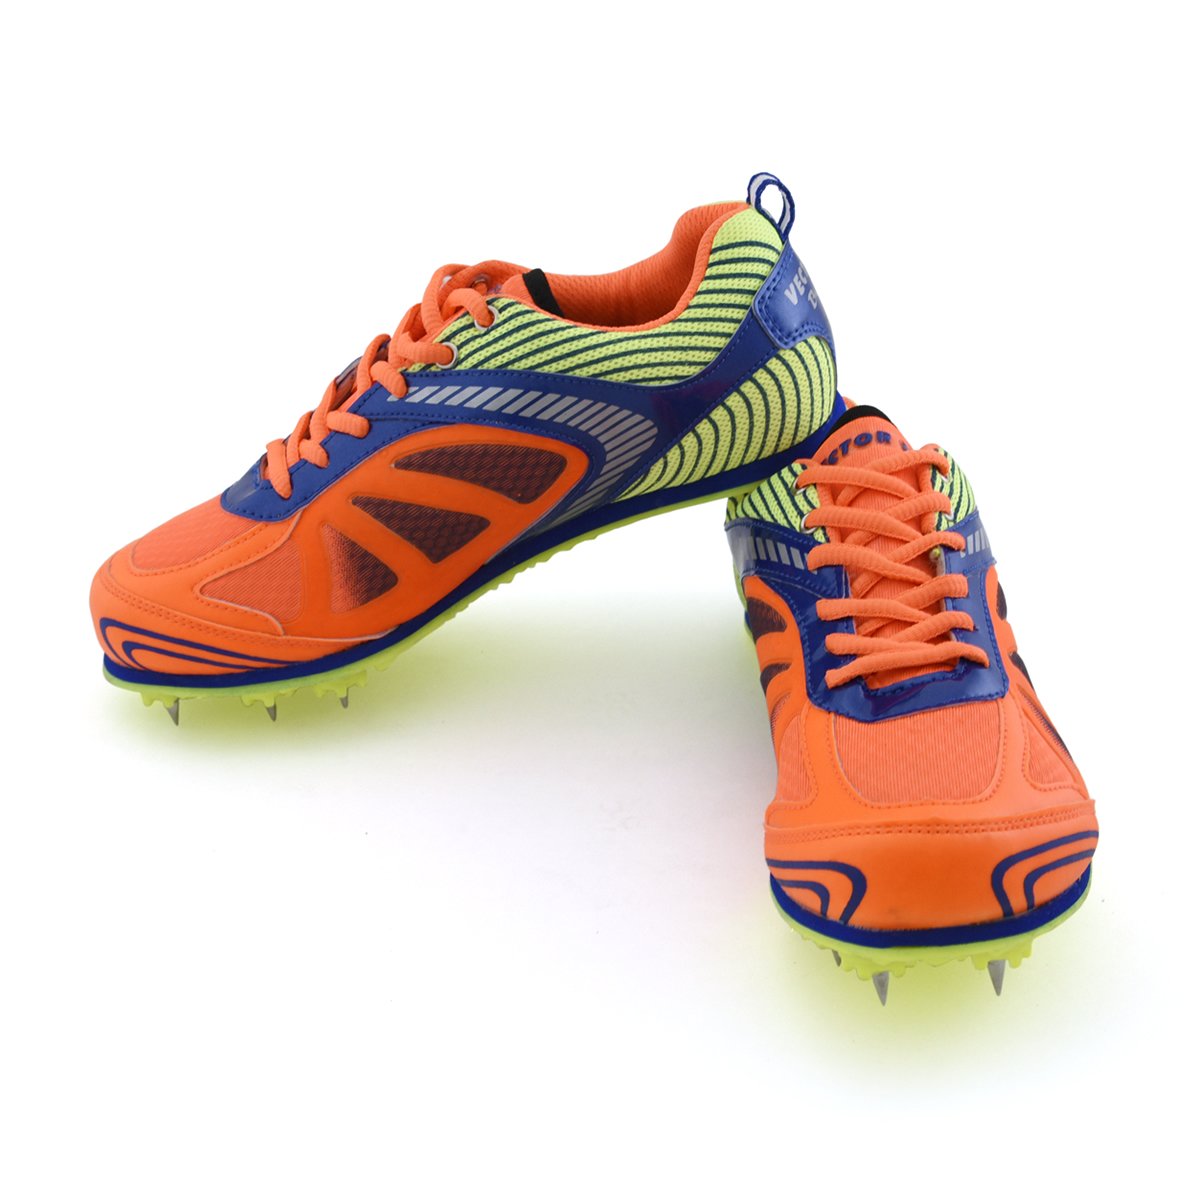 Vector X Bolt Spike Track And Field Shoes - Best Price online Prokicksports.com